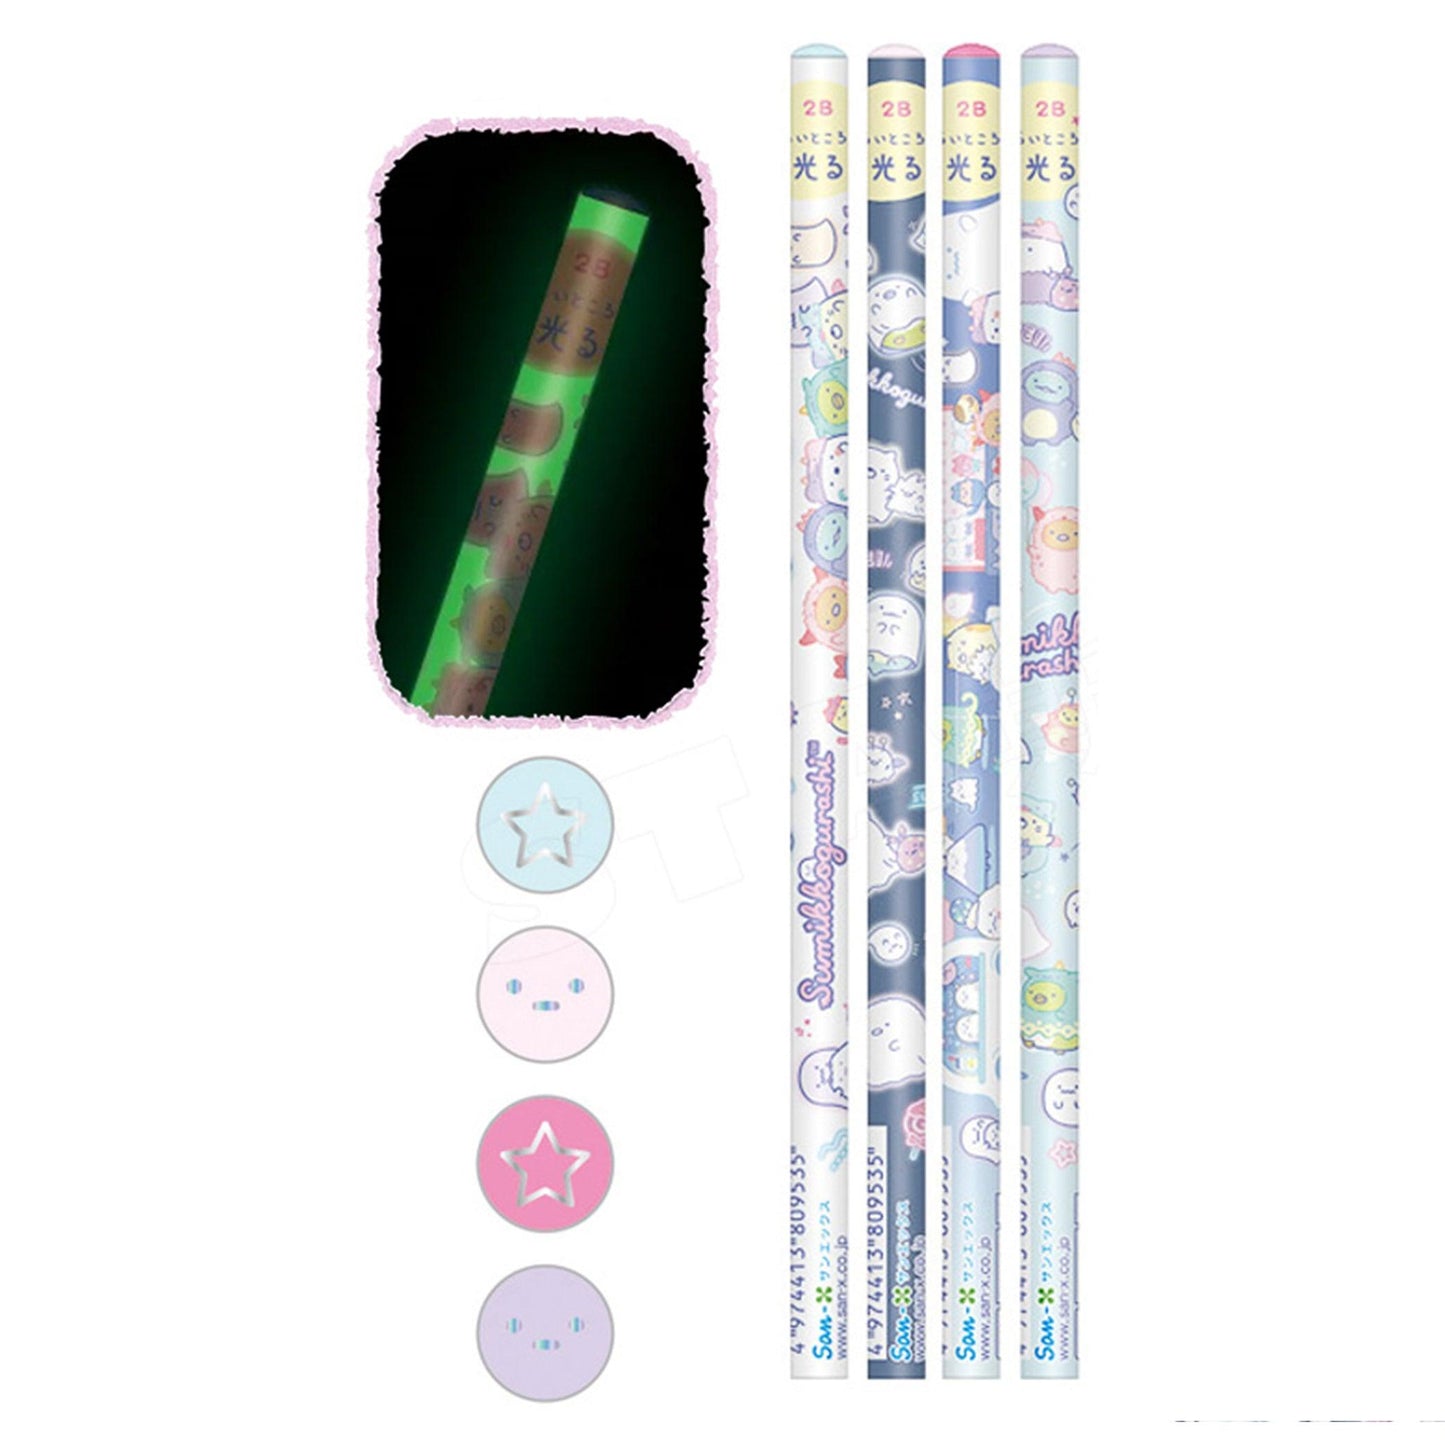 Corner Creature Stationery SAN-X 10th Anniversary Ghost Paradise Series 2B Pencils 4 Sets Pencil Caps 5 Sets Backing Board Cartoon Primary School Students Teenagers Home School Office PH11401 ST91101 - CHL-STORE 